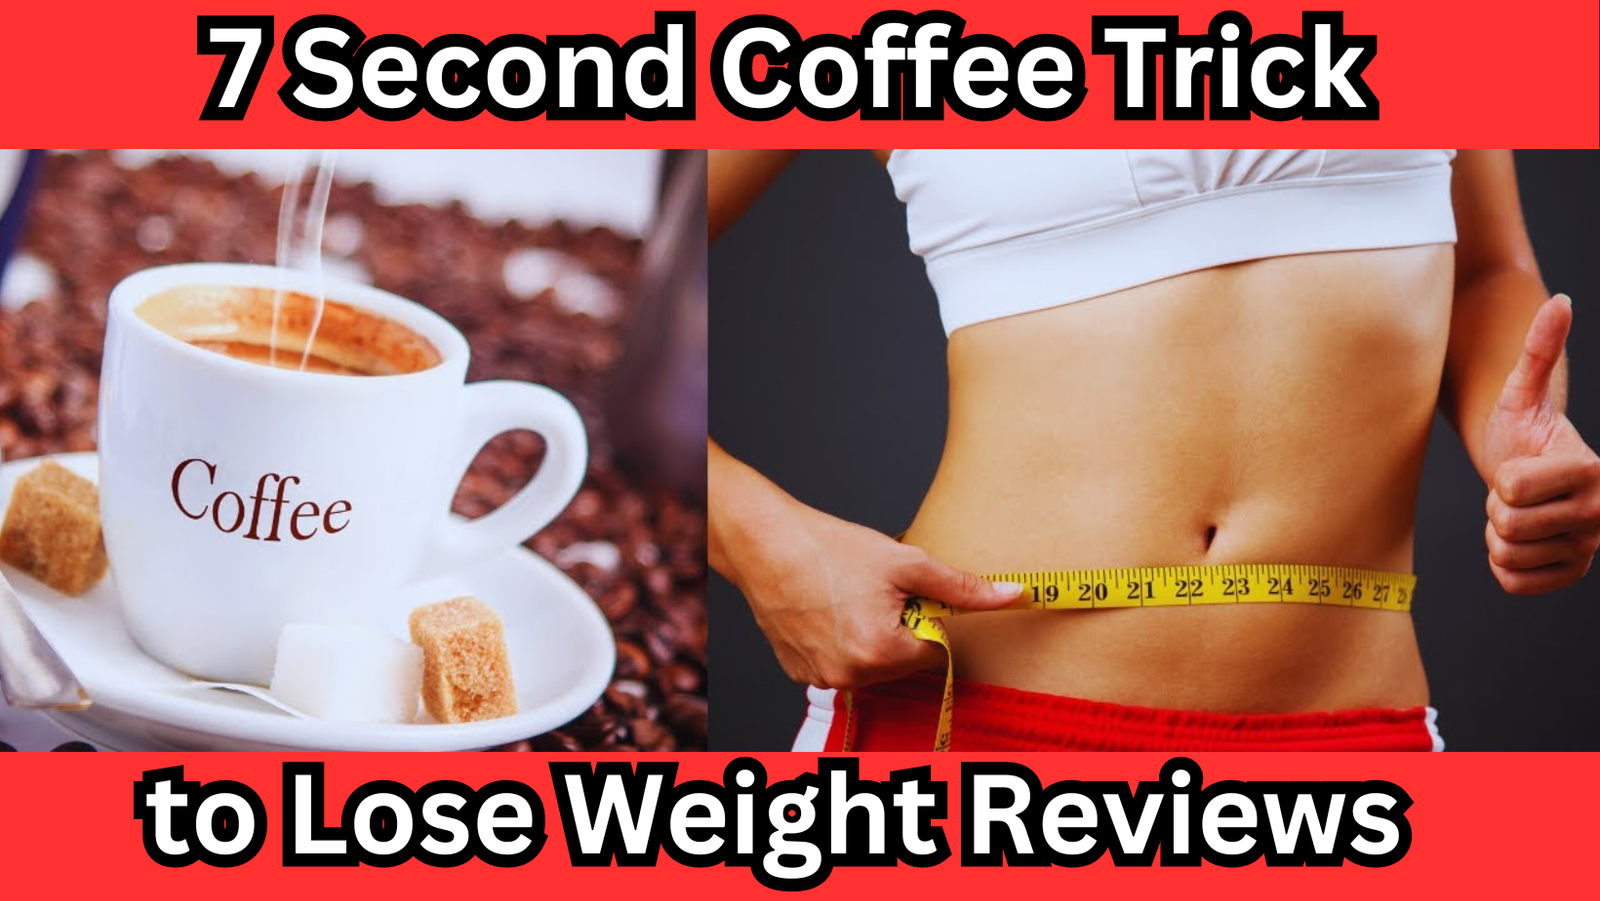 7 second coffee trick to lose weight reviews